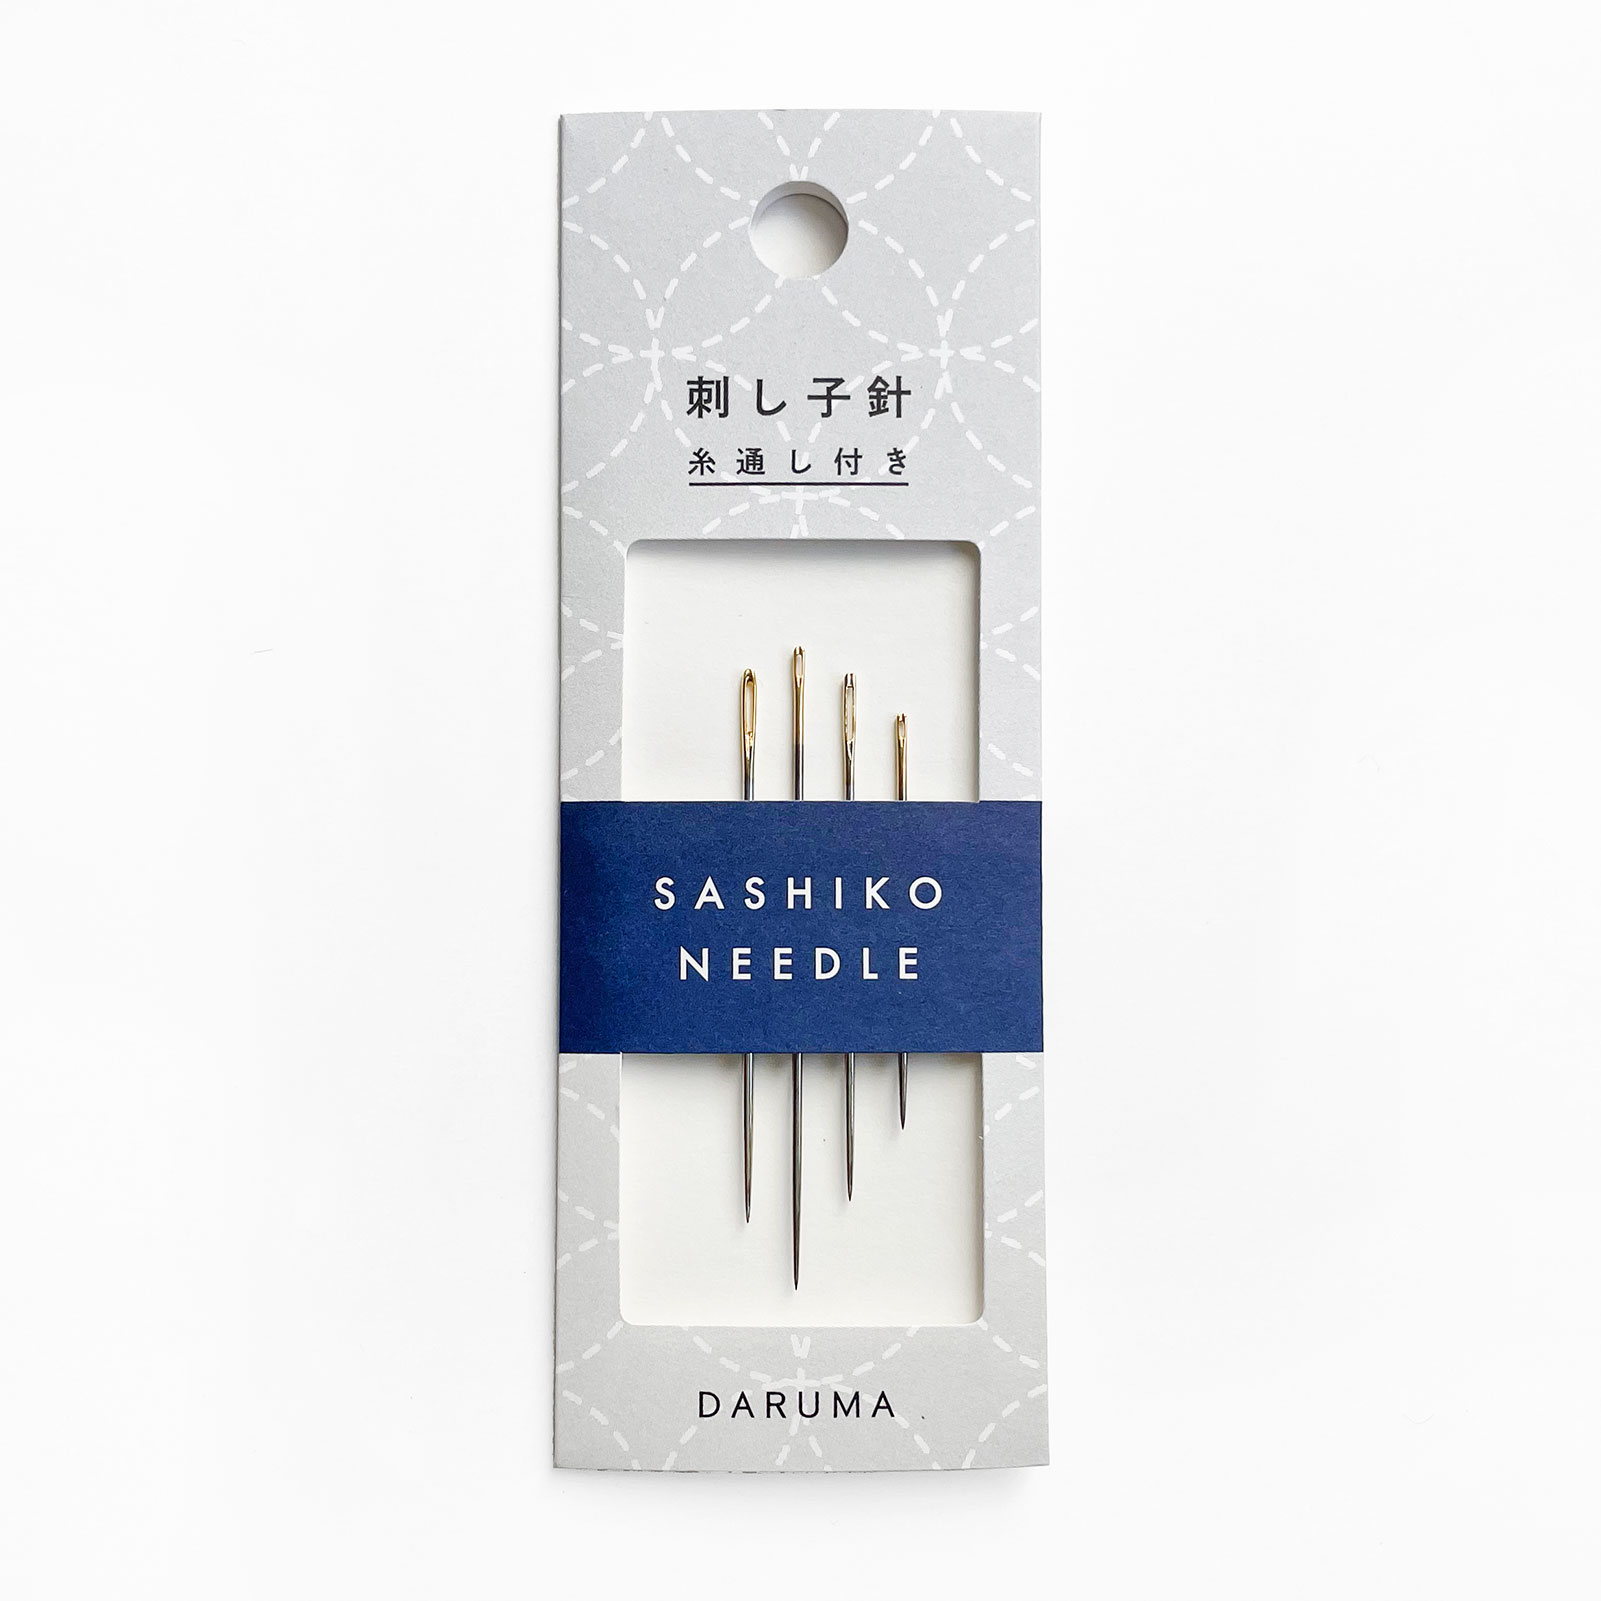 What Are Sashiko Needles?, A Quick Guide